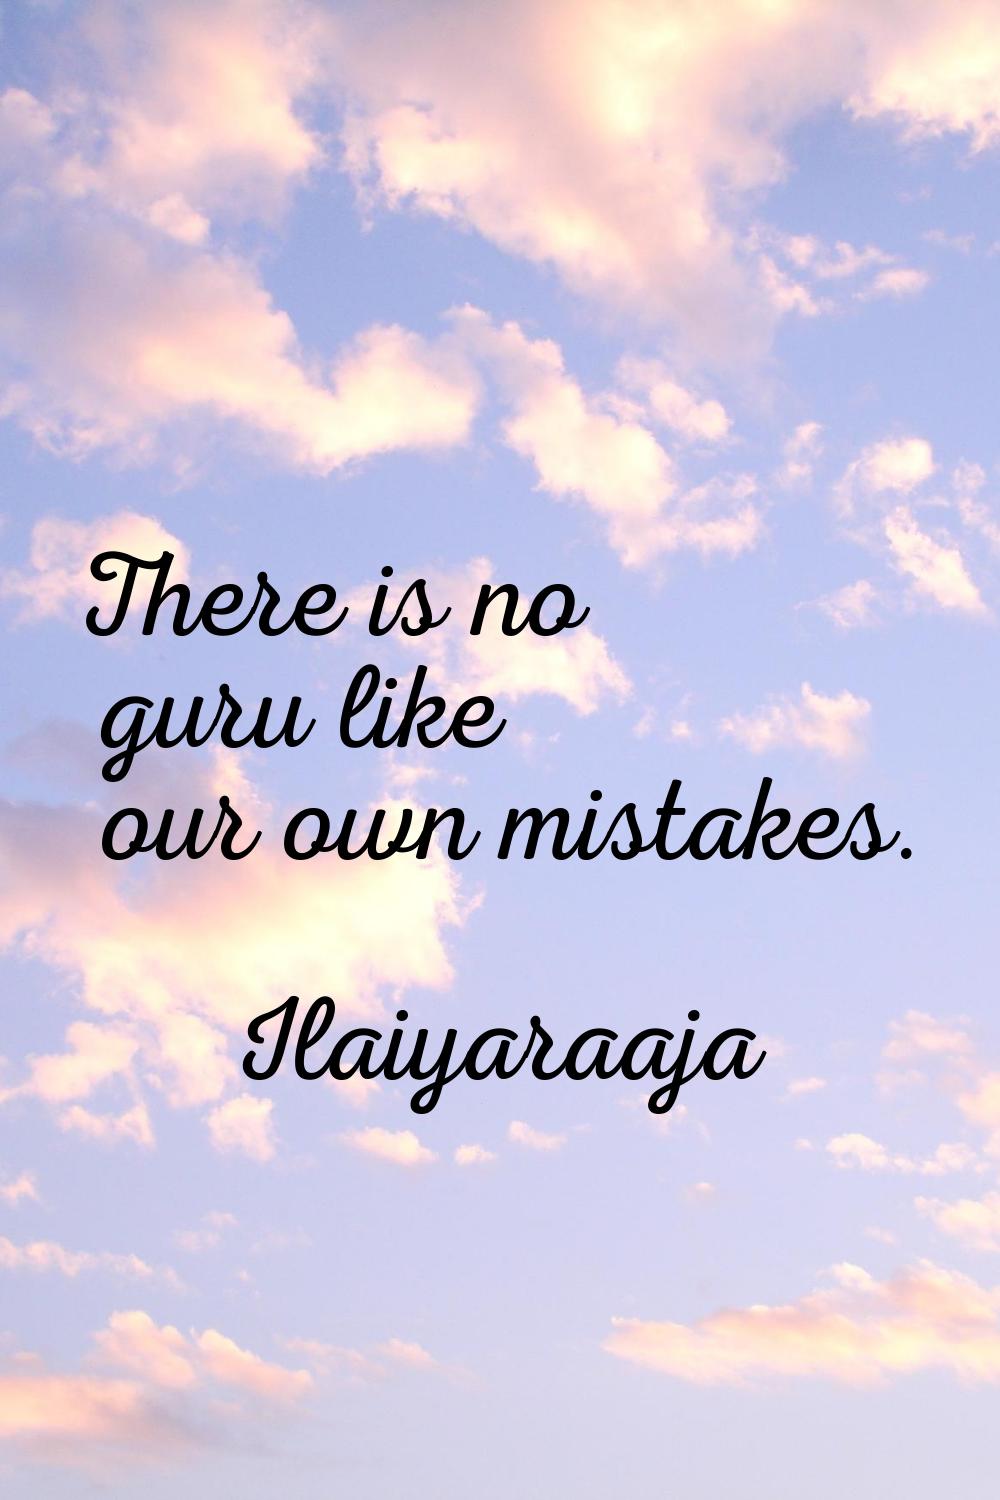 There is no guru like our own mistakes.